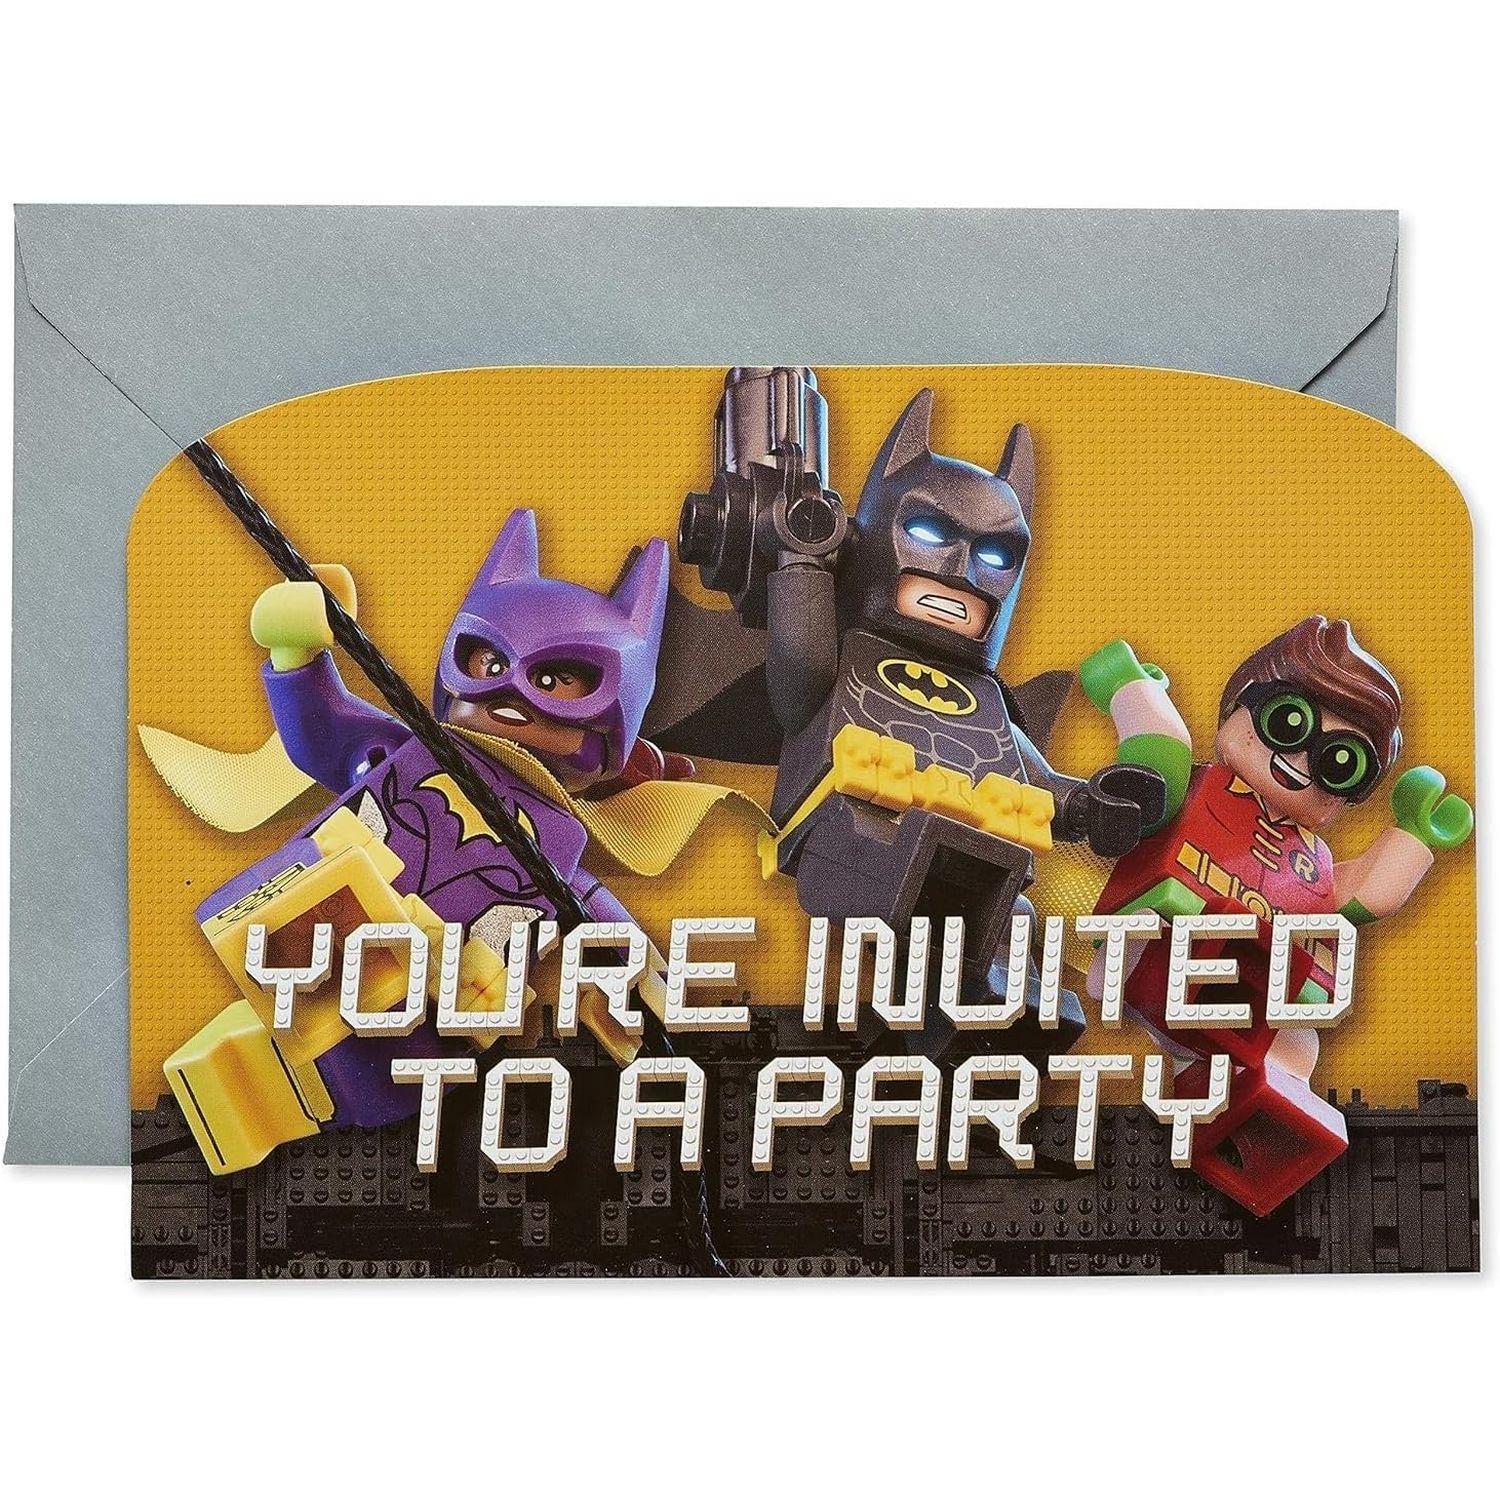 Lego Batman Movie Characters Invitations (Pack of 8) (Multicoloured) (One Size)